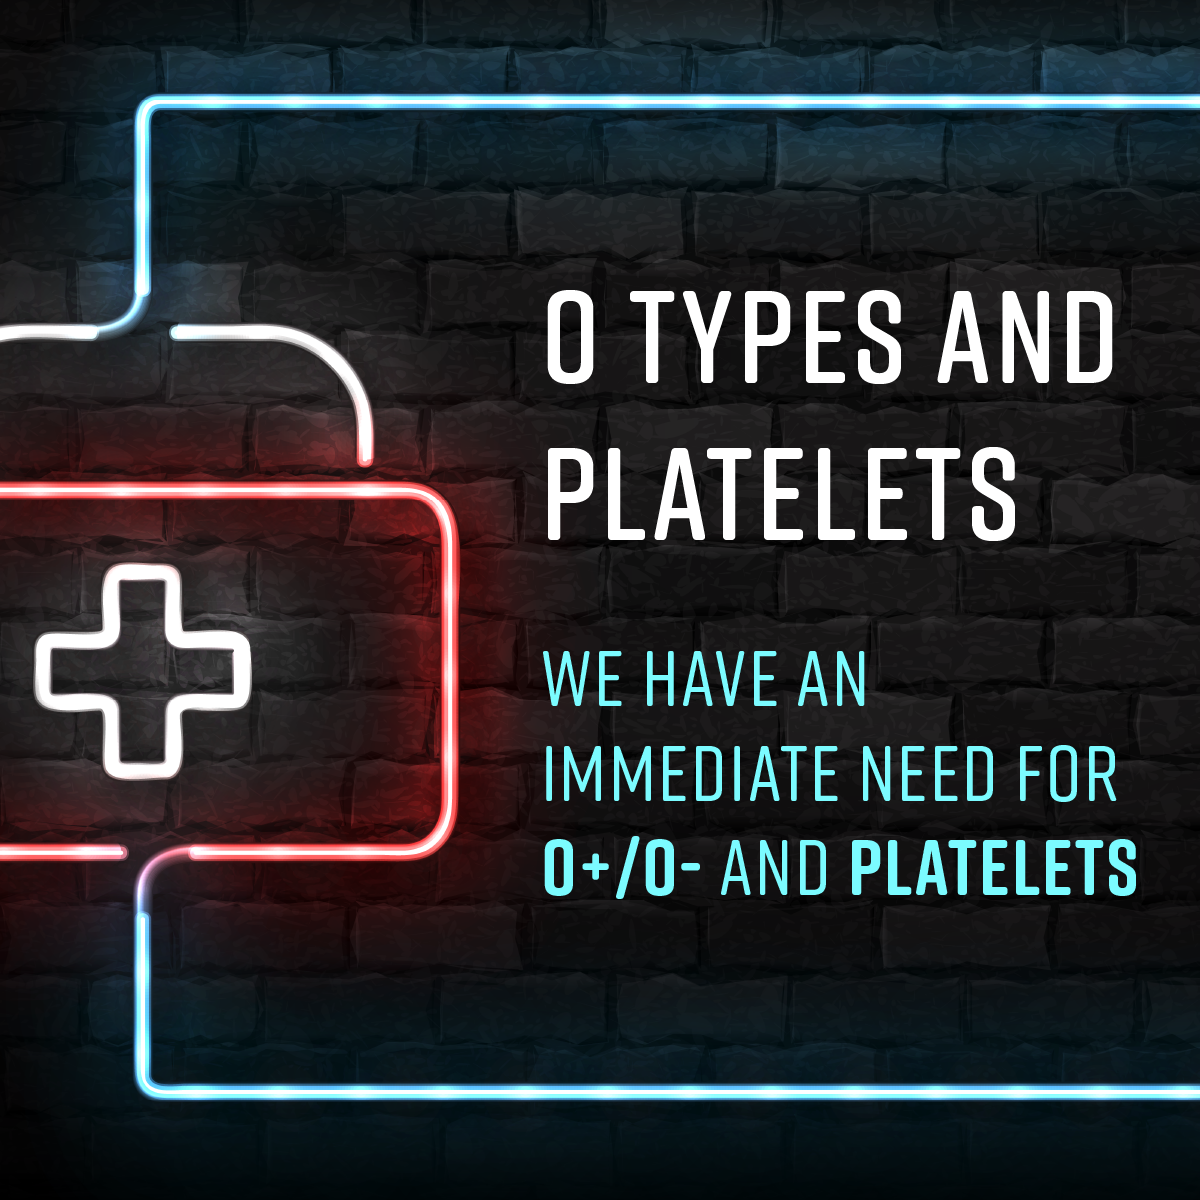 Critical need for all type O blood and platelets